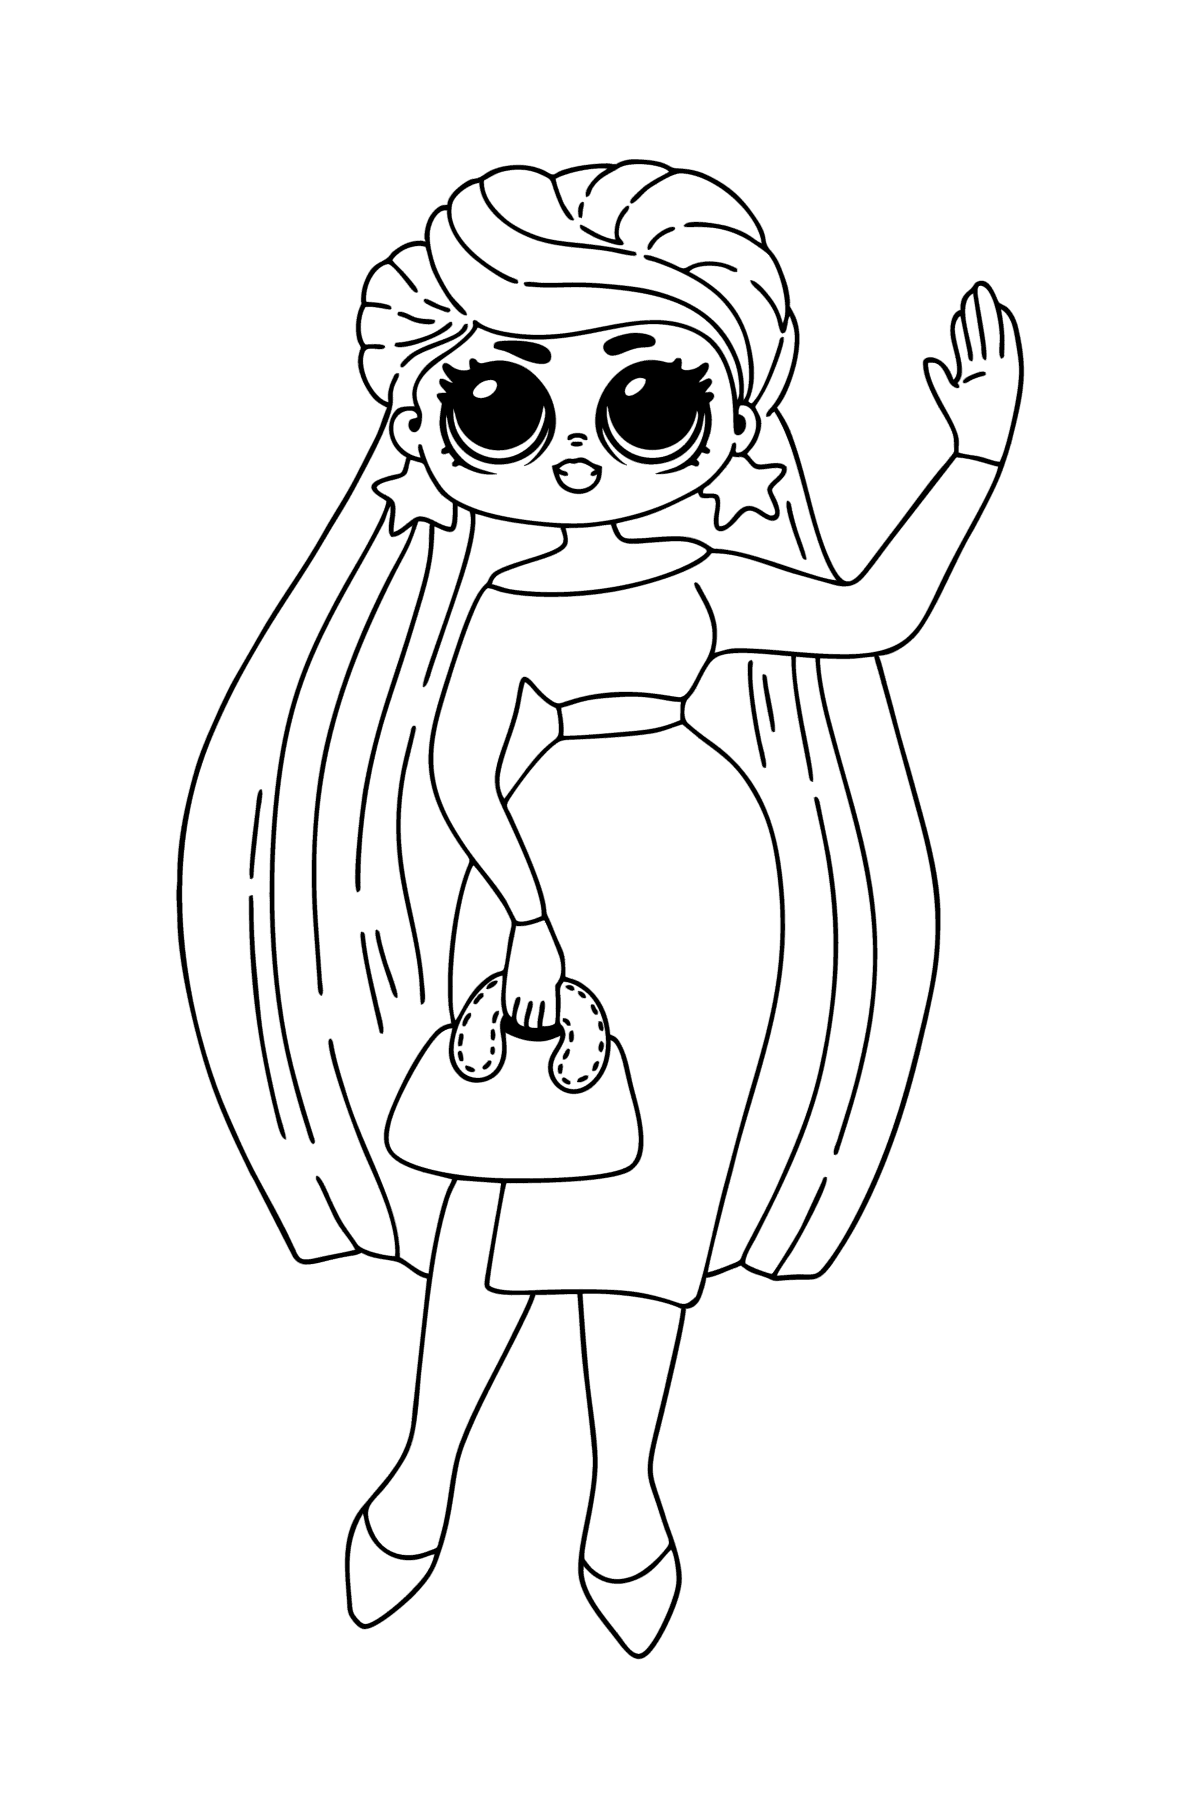 Coloring page LOL Surprise OMG Lara - Coloring Pages for Kids